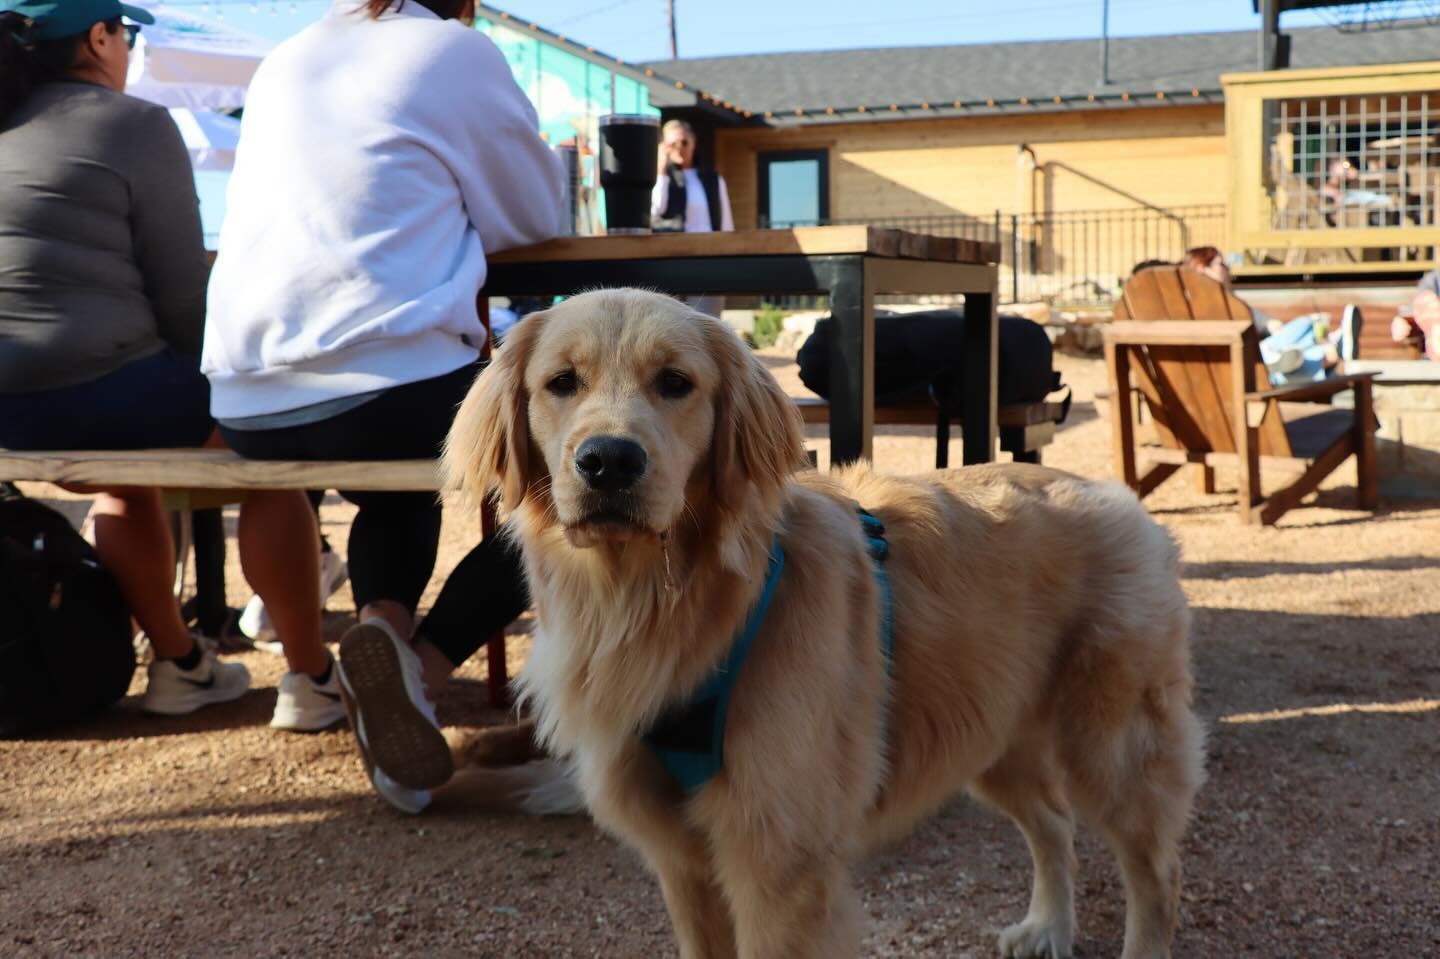 We love our furry friends! Come on over and enjoy a cold drink with live music starting at 2pm this afternoon 🎶🐶🍻